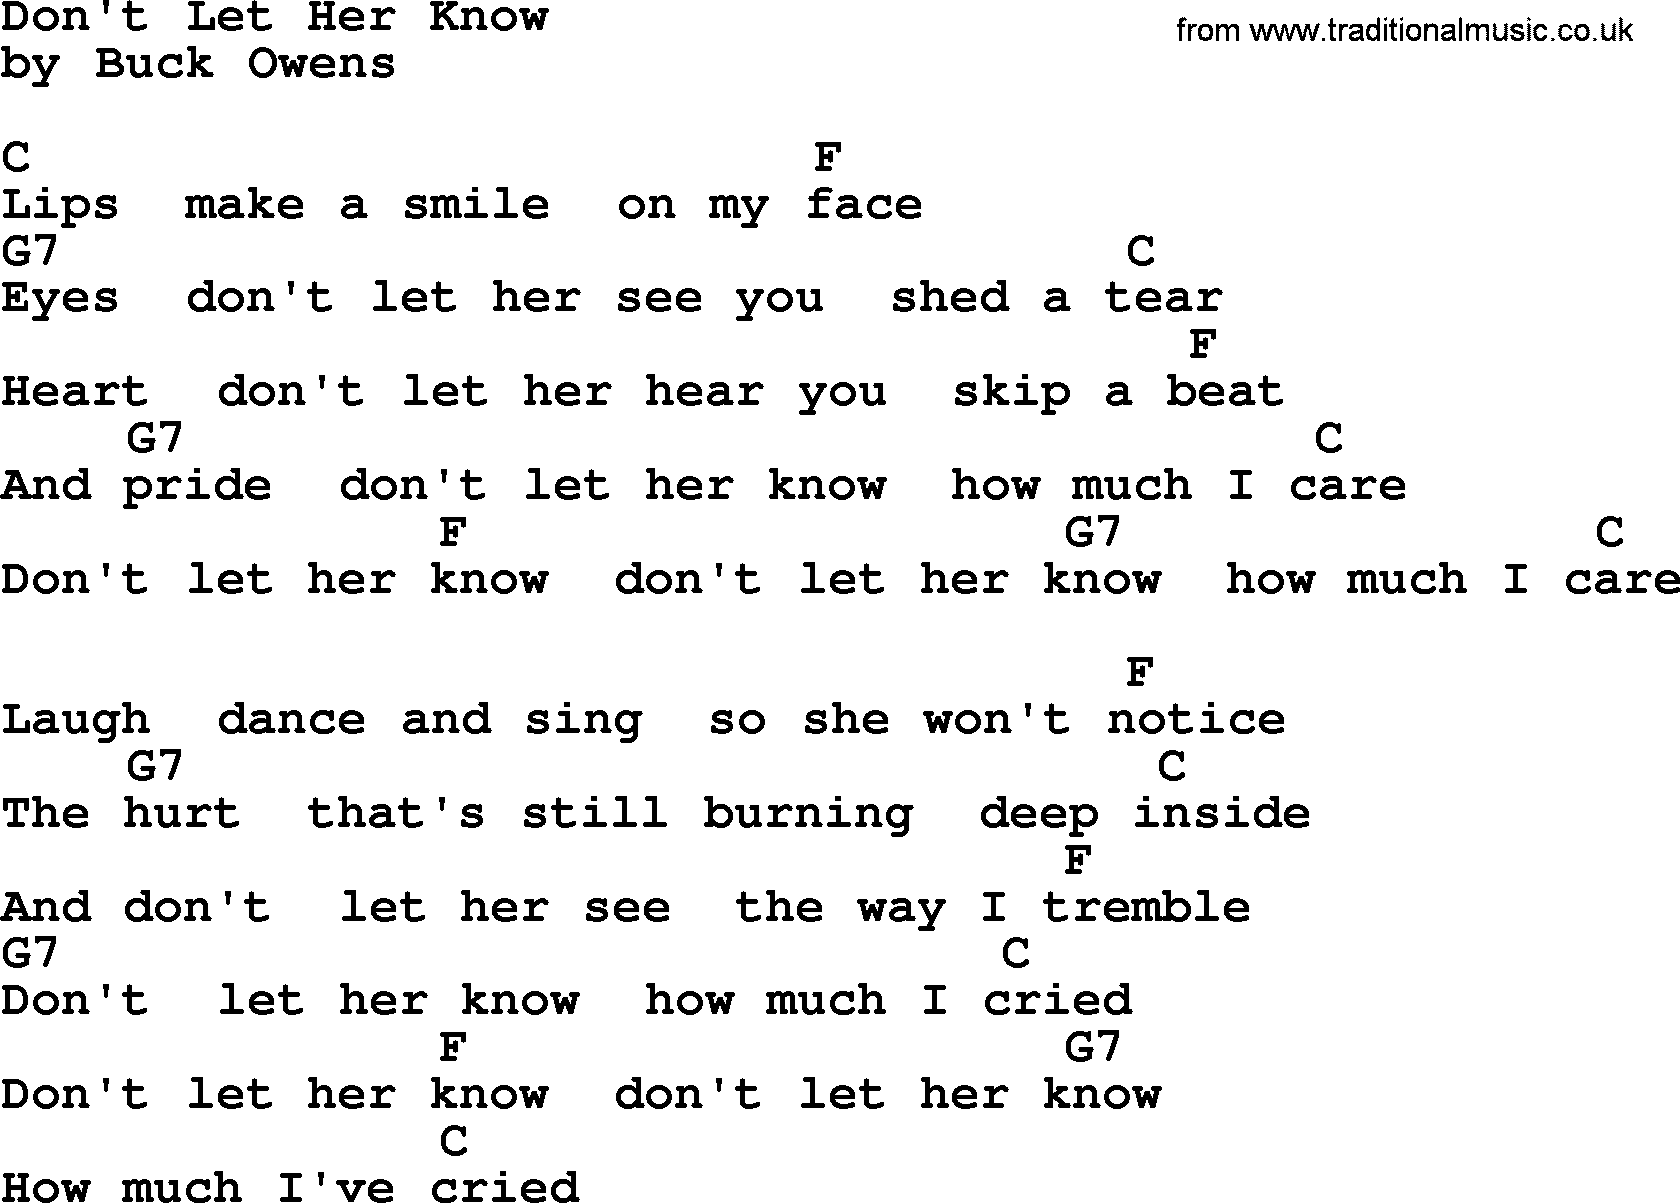 Bluegrass song: Don't Let Her Know, lyrics and chords